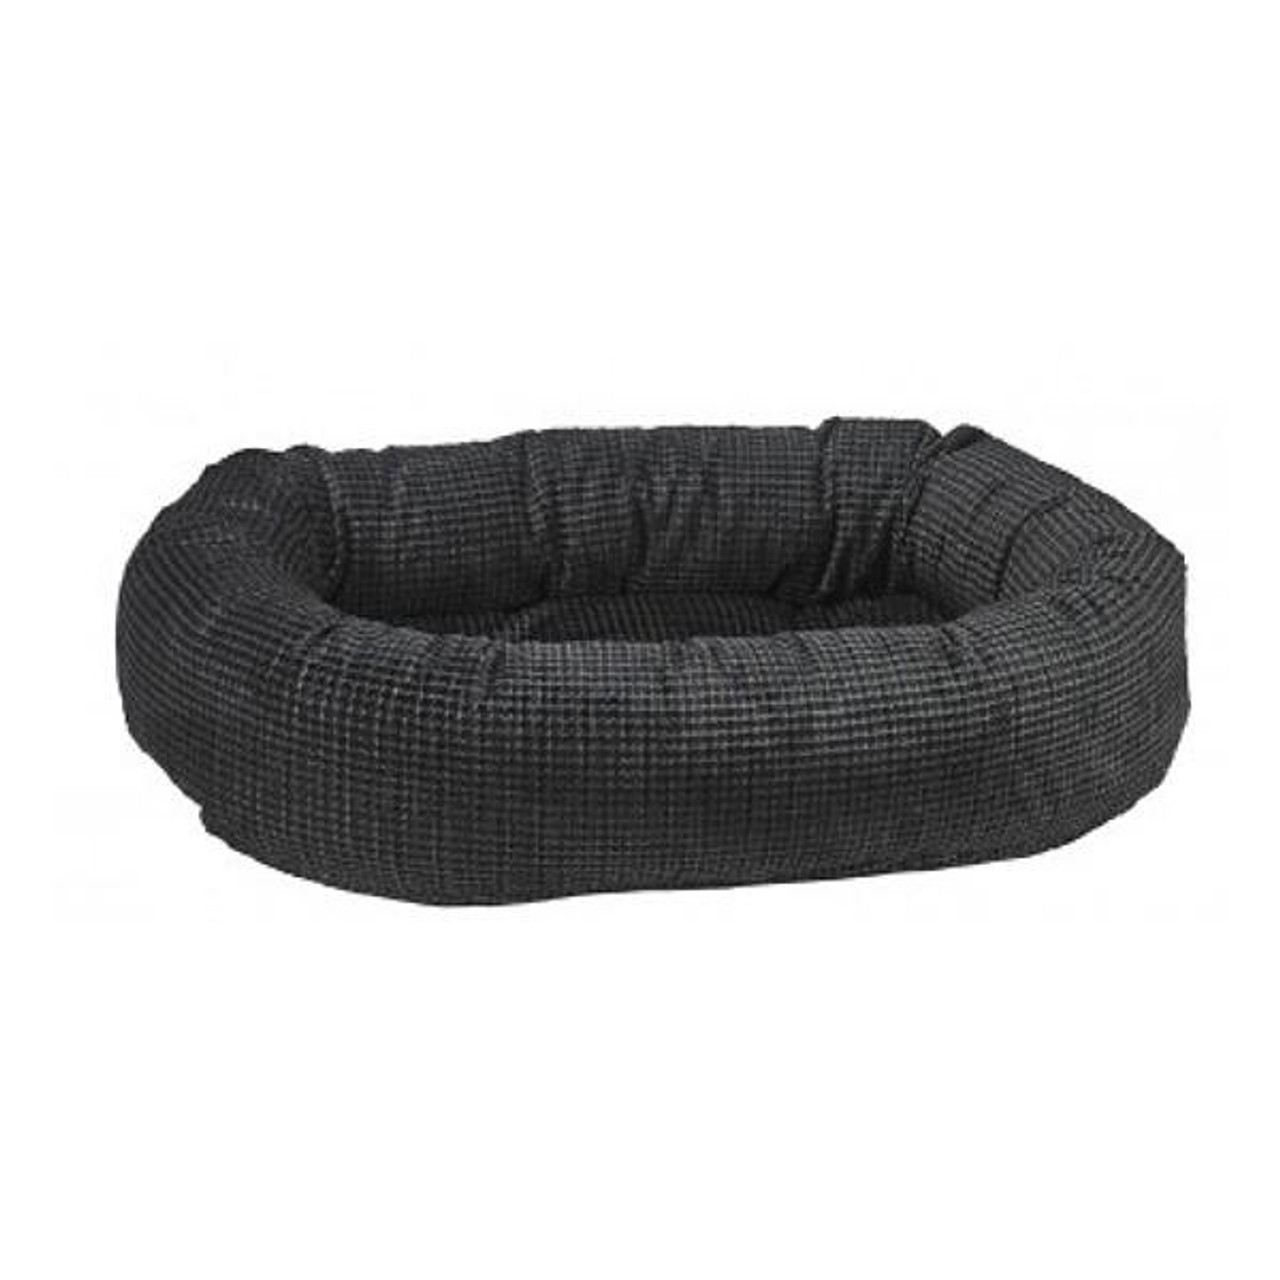 https://cdn11.bigcommerce.com/s-dppmv5/images/stencil/1280x1280/products/53962/112177/bowsers-iron-mountain-chenille-donut-pet-dog-bed__32701.1663906642.jpg?c=2